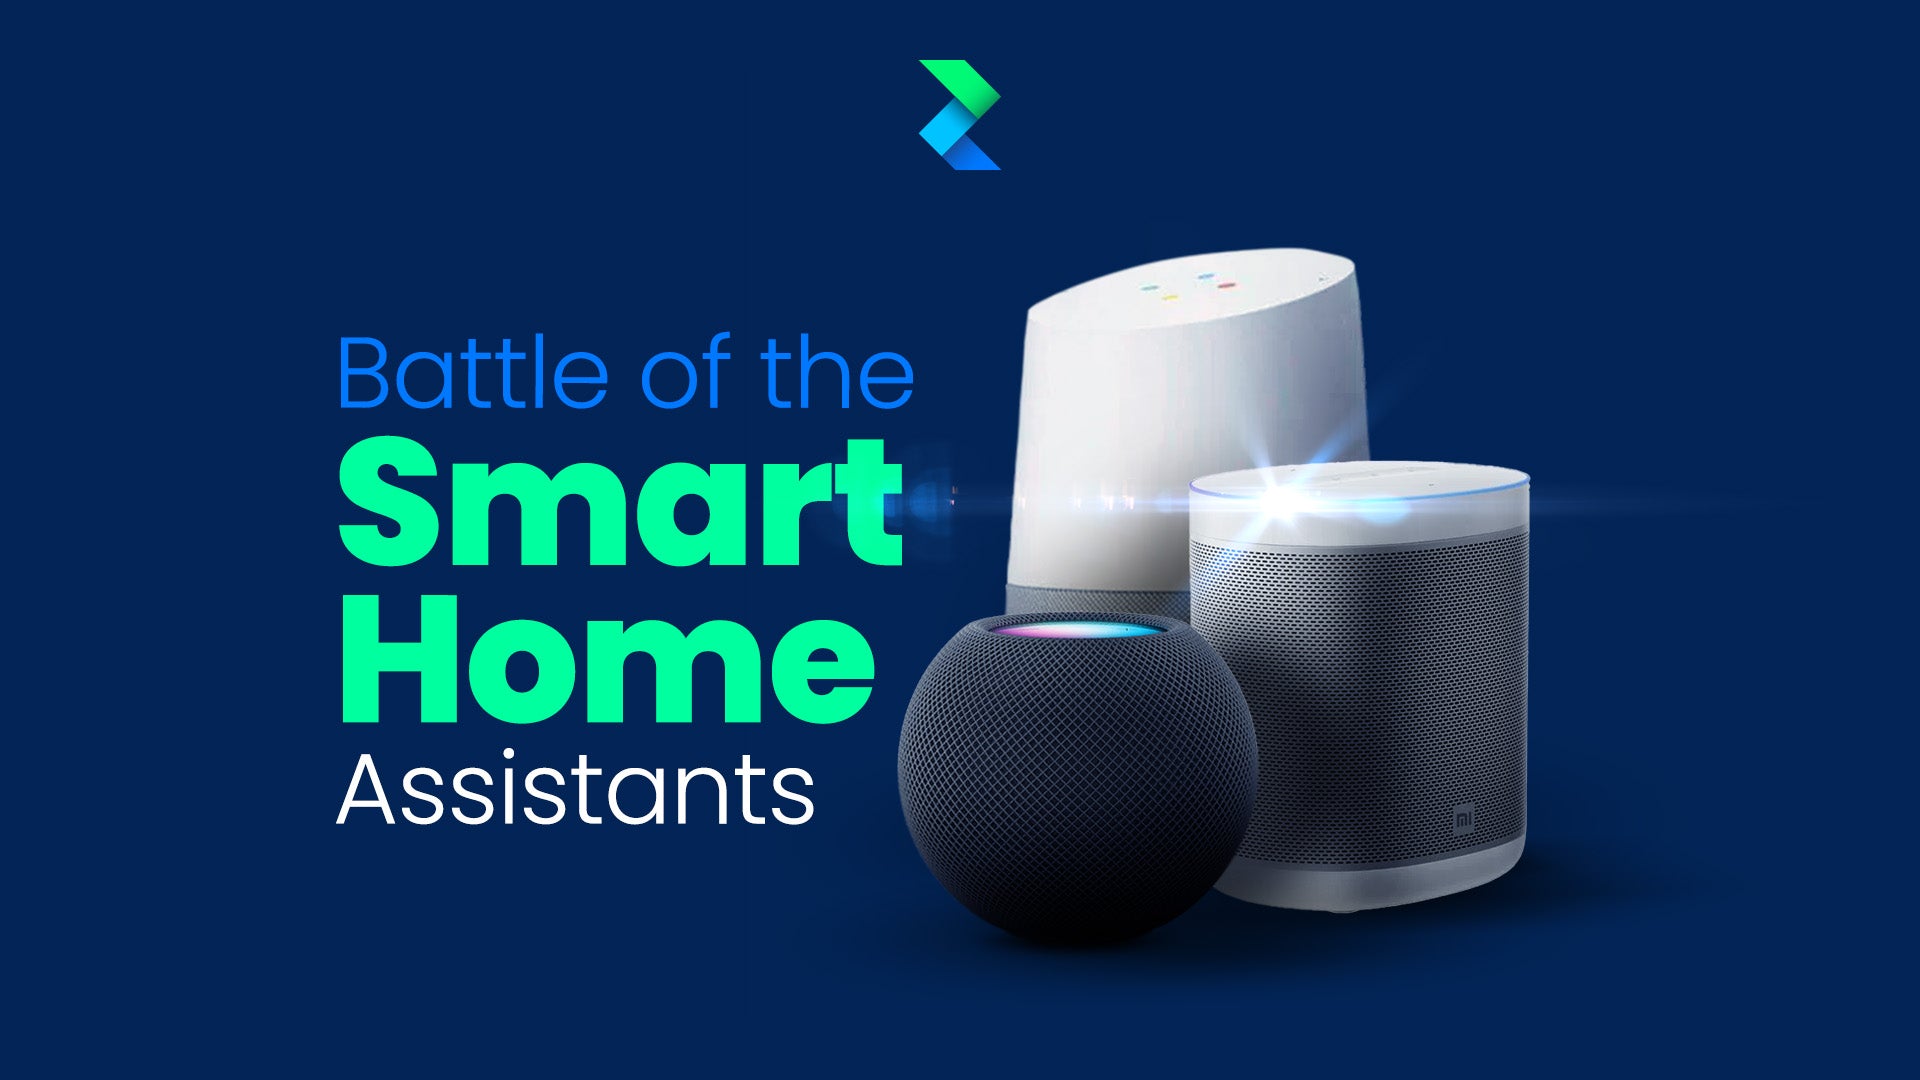 Battle of the Smart Home Assistants